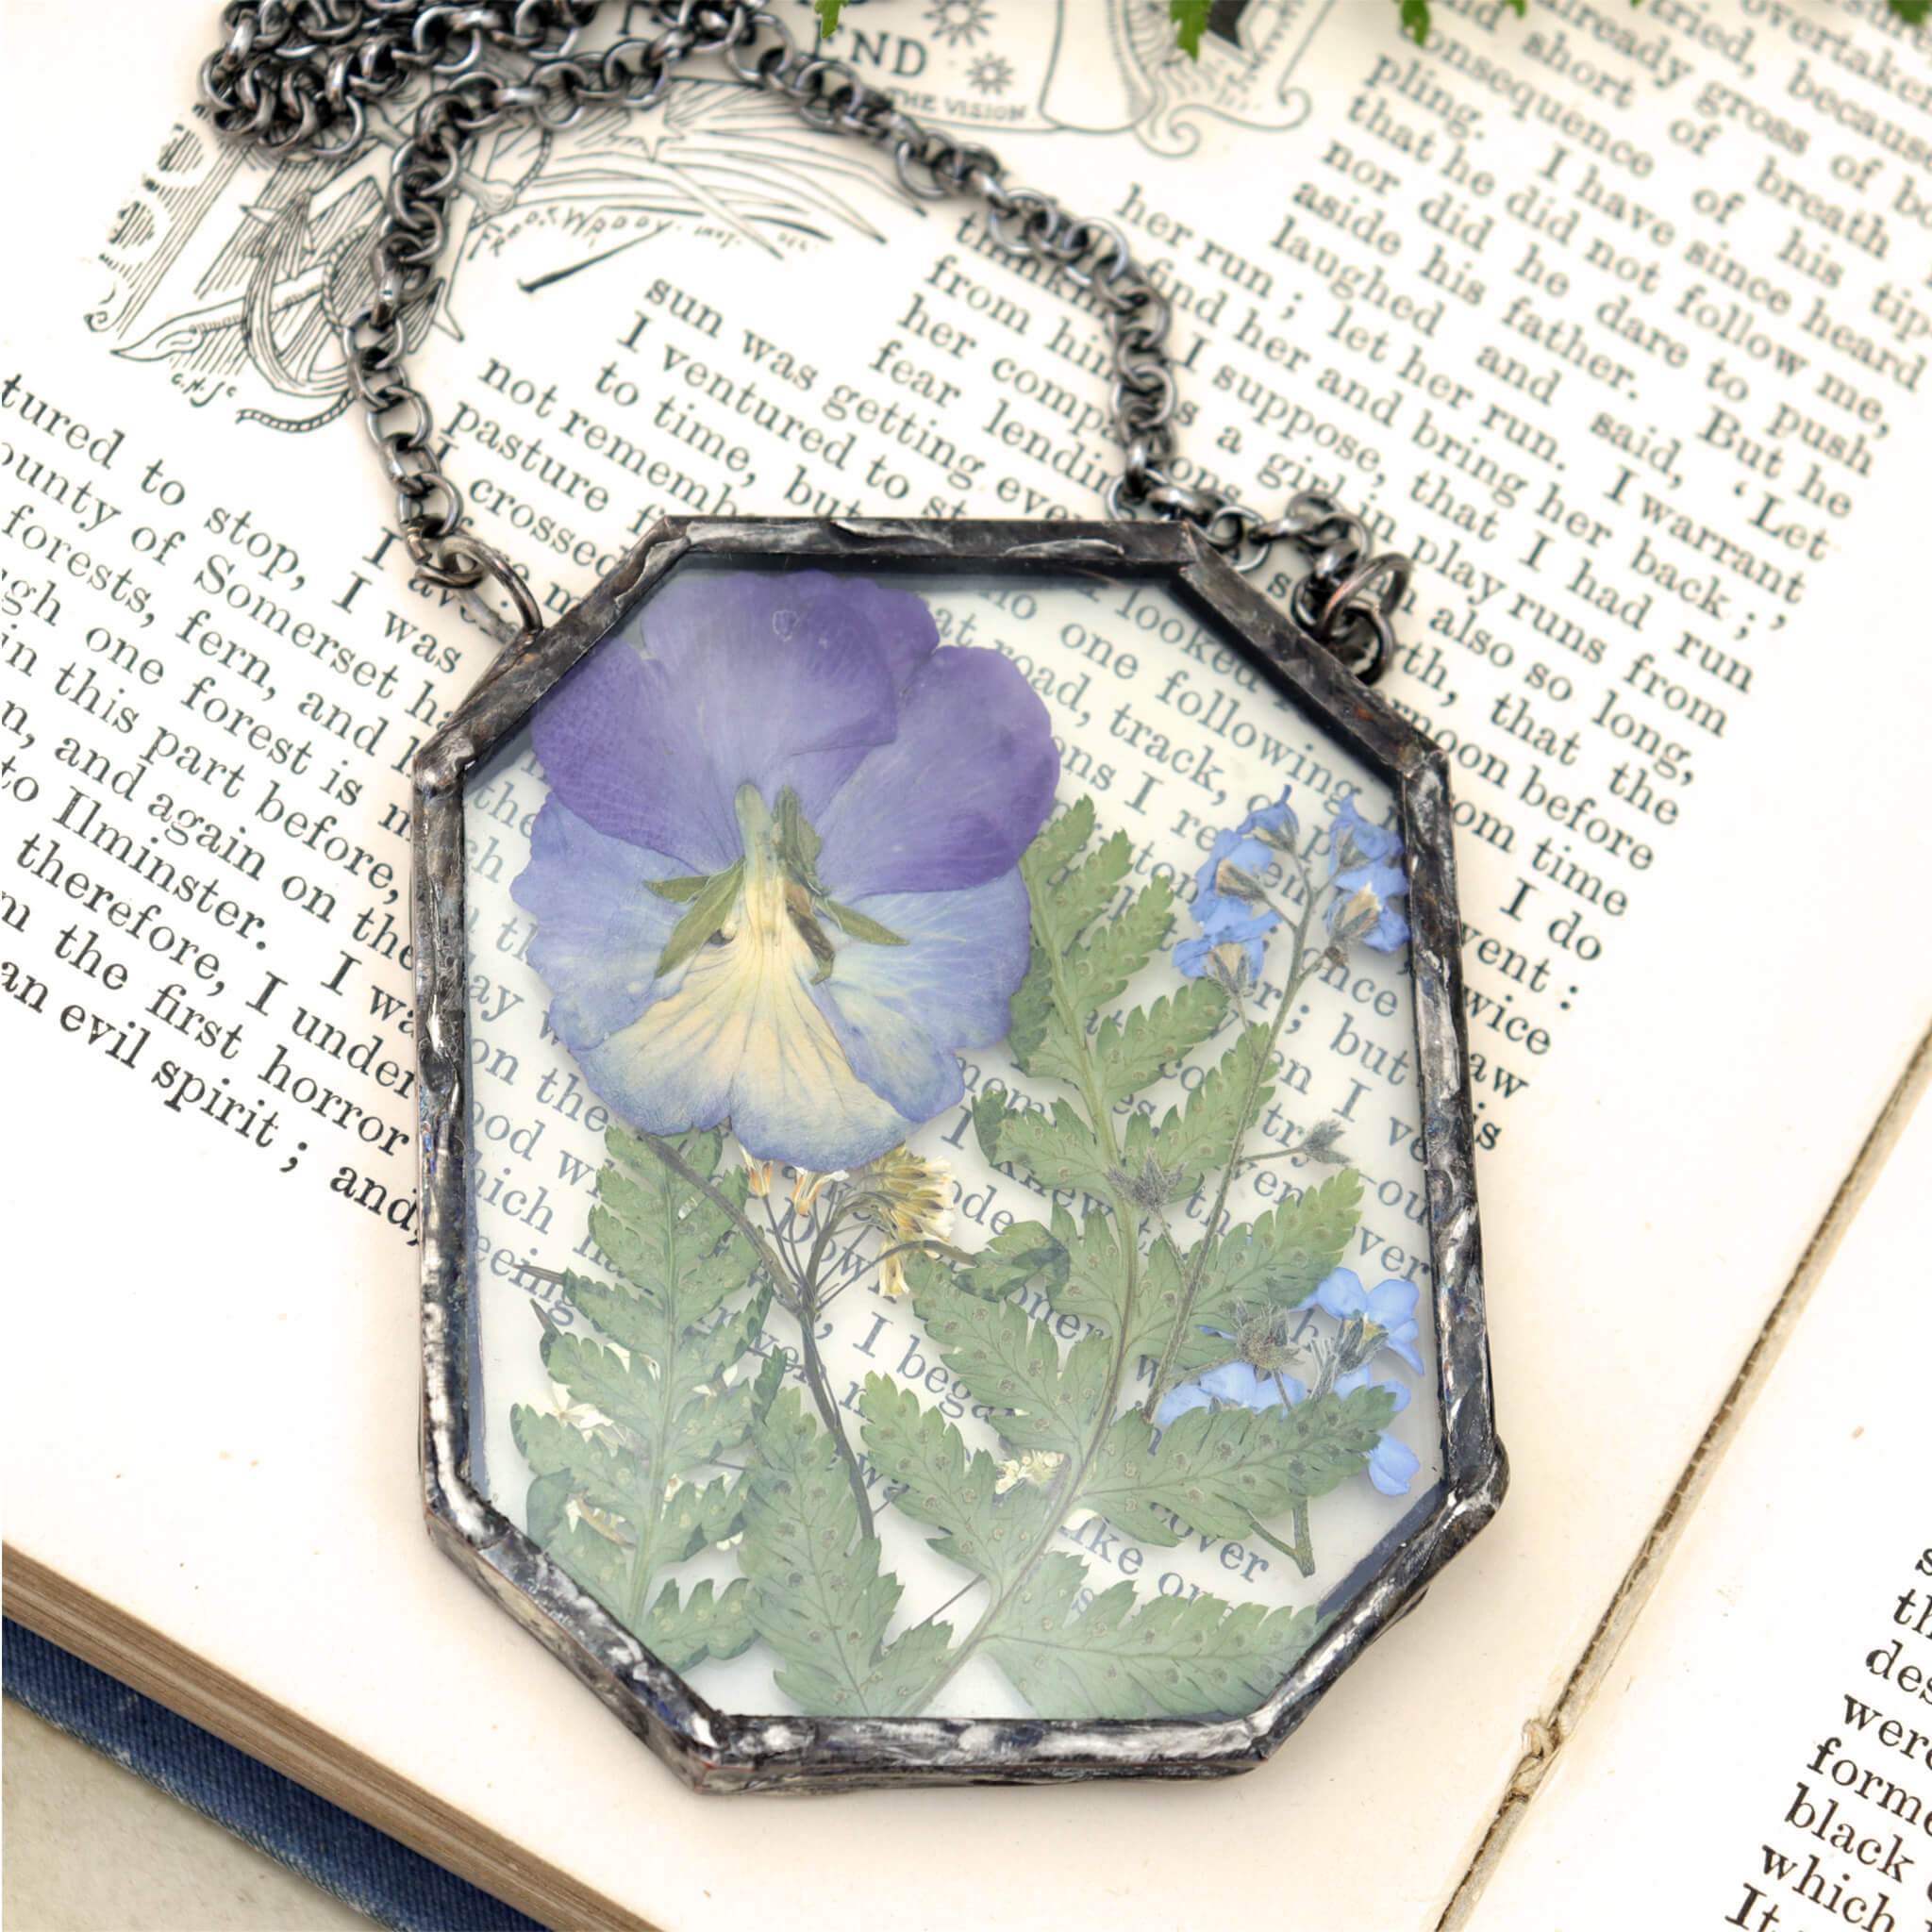 violet flowers and greenery in glass and solder necklace lying on an old book